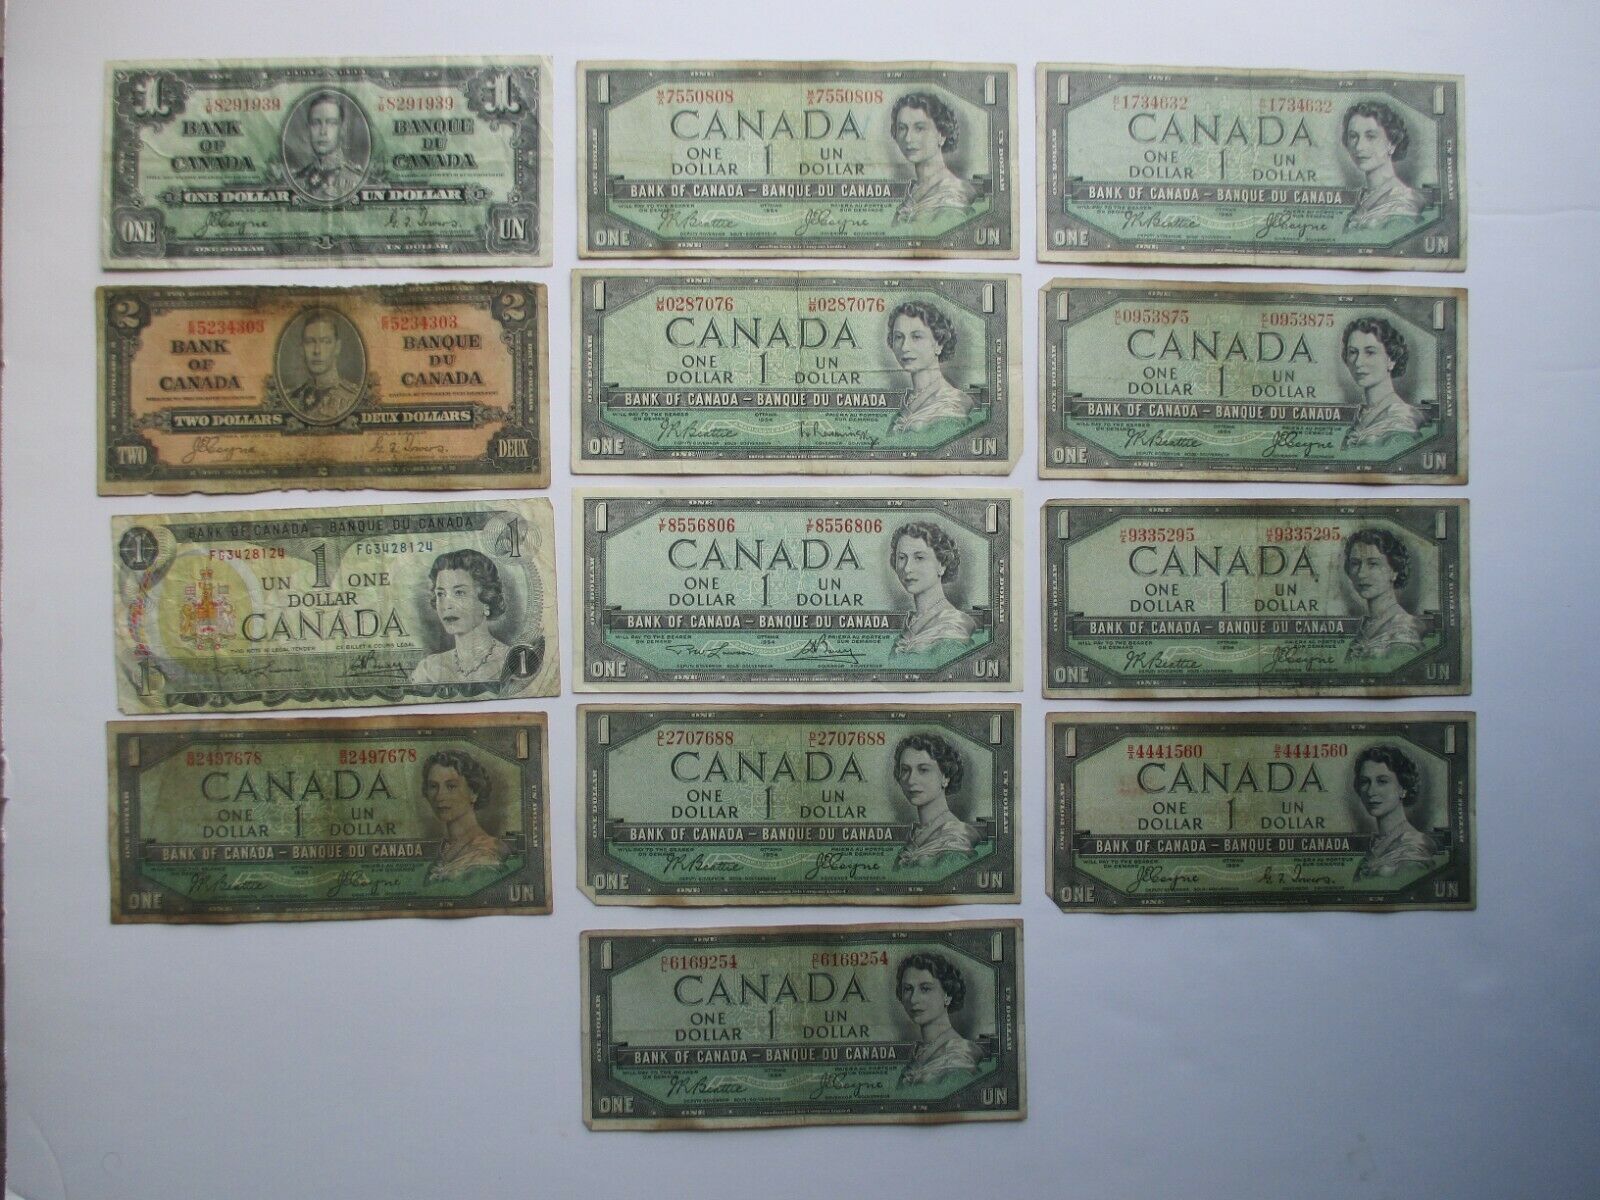 Canadian Notes Lot - (1) 1937 $1 And $2, (10) 1954 $1.00, (1) 1973 $1.00 Notes